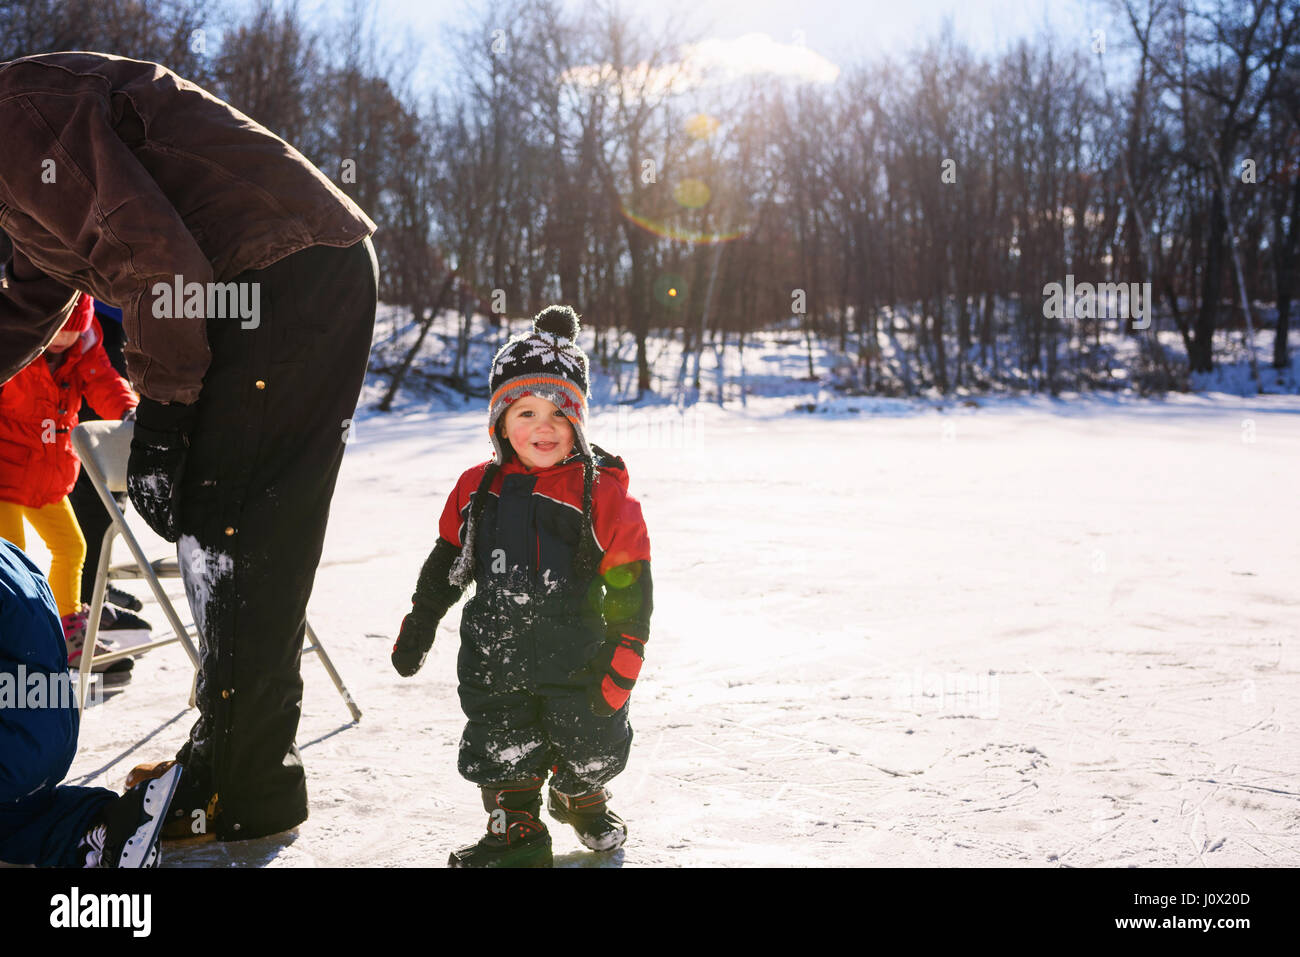 Father ice-skating with three children Stock Photo